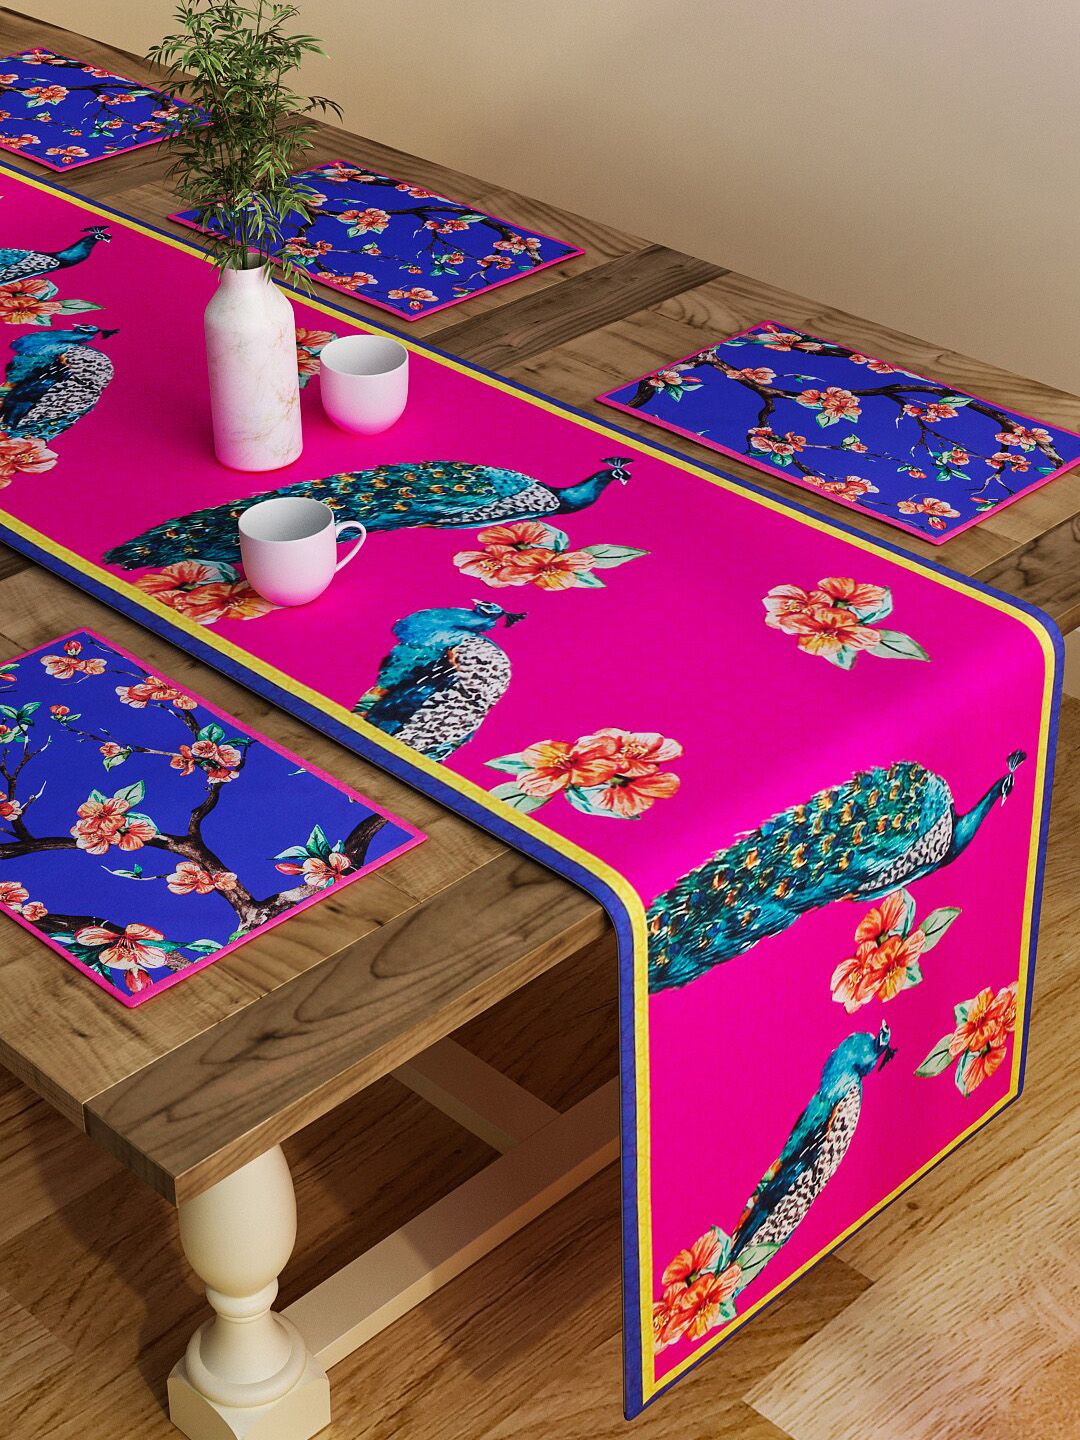 SEJ by Nisha Gupta Set of 6 Pink Printed Cotton Table Placemats and Runner Price in India